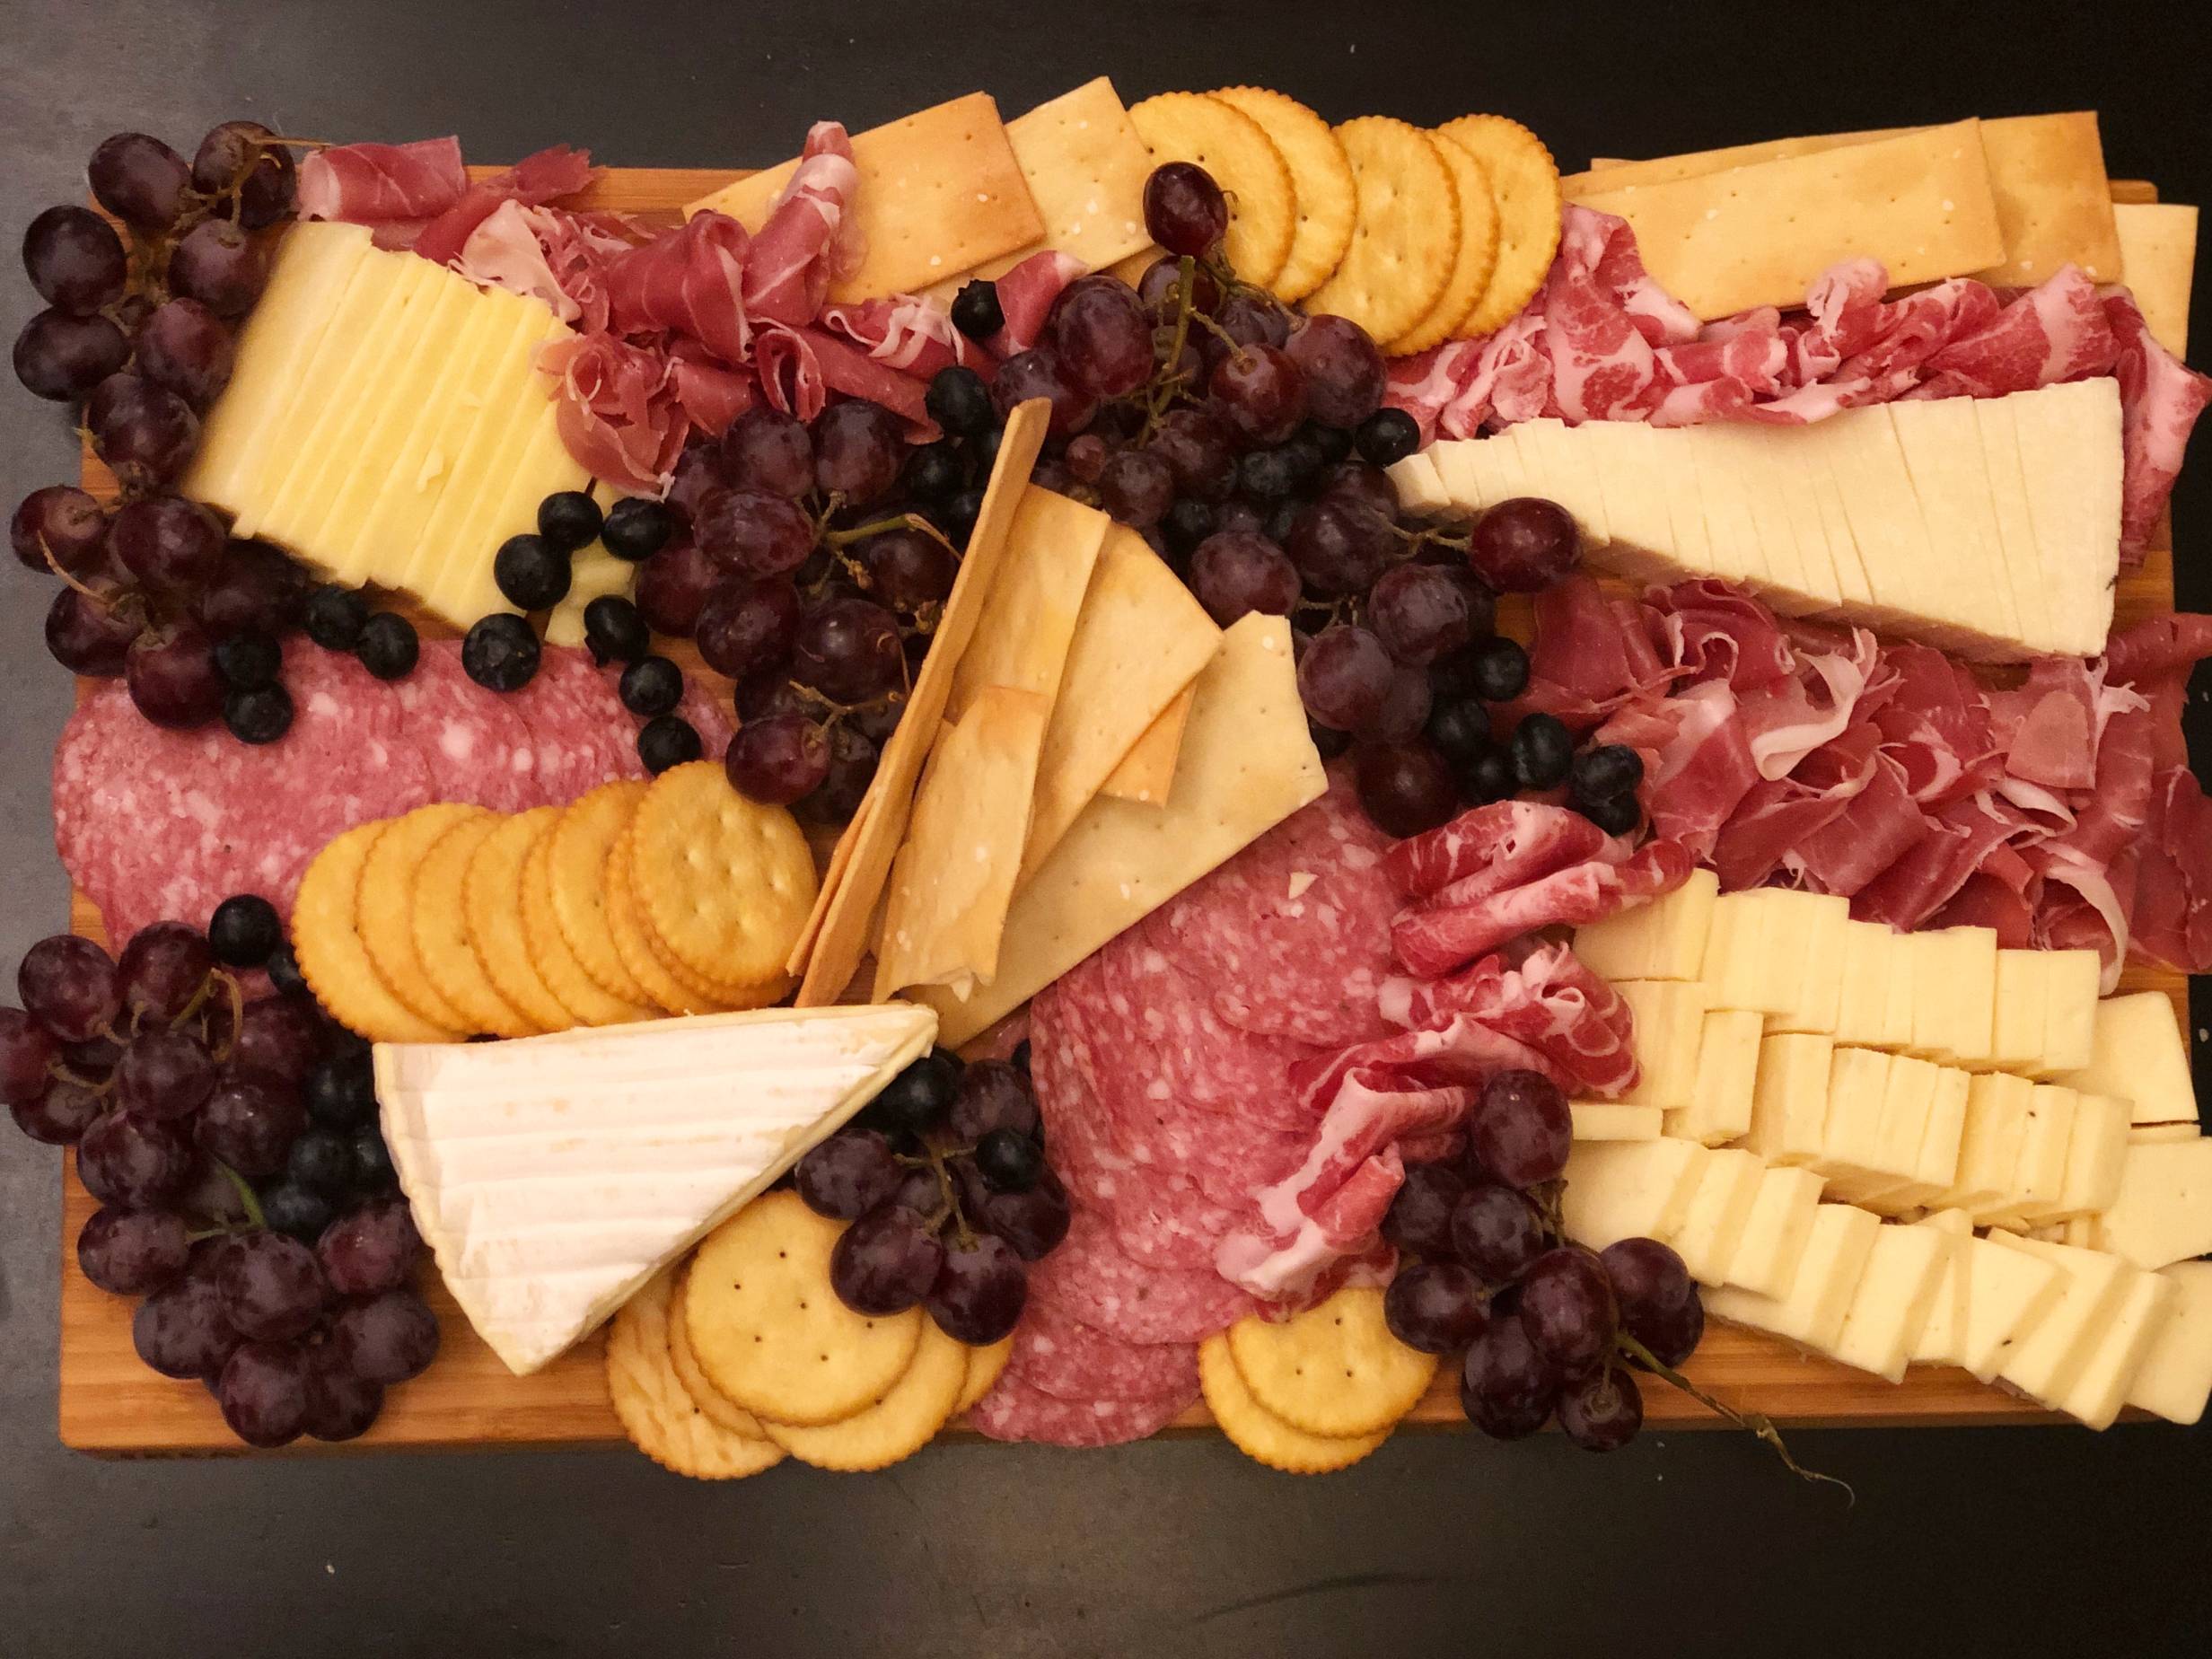 How to make a charcuterie board with cheeses and meats from Harvest Market